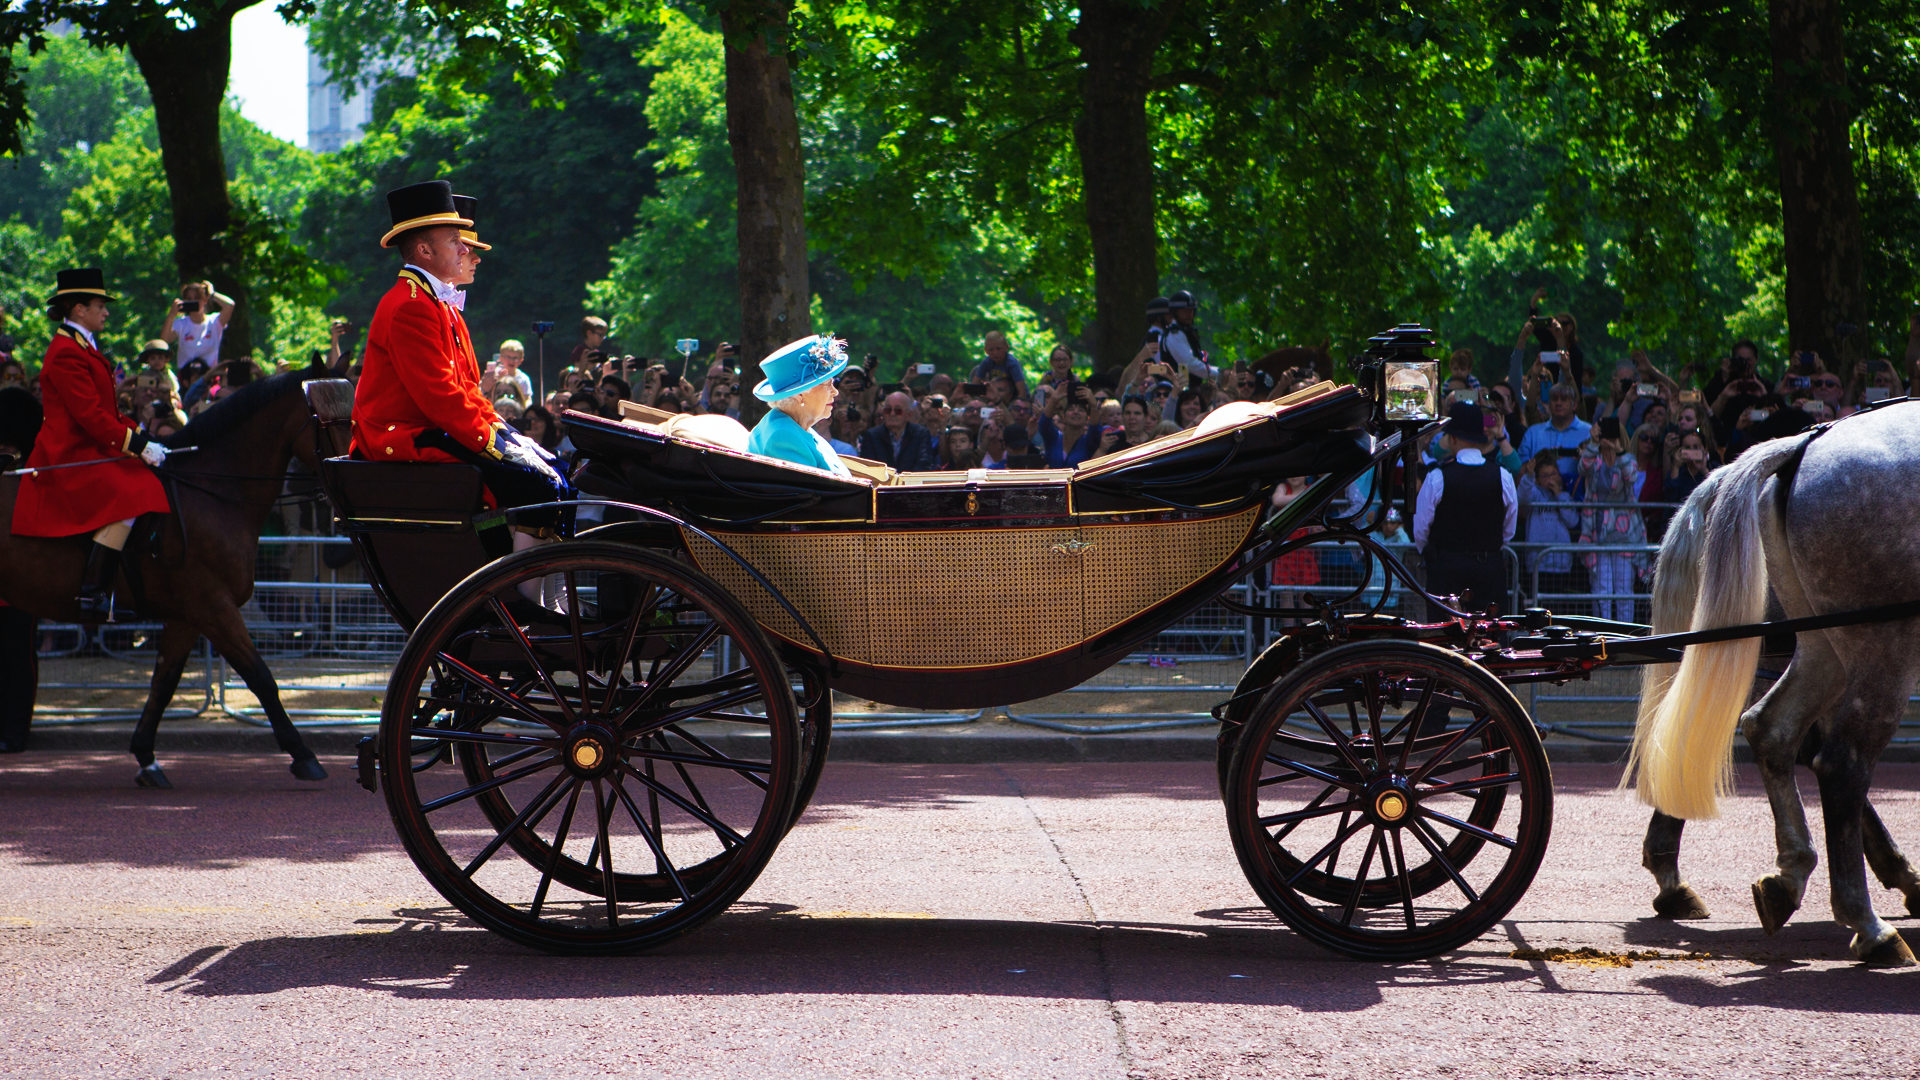 The UK puts eco-rules in place ahead of the Queen’s funeral